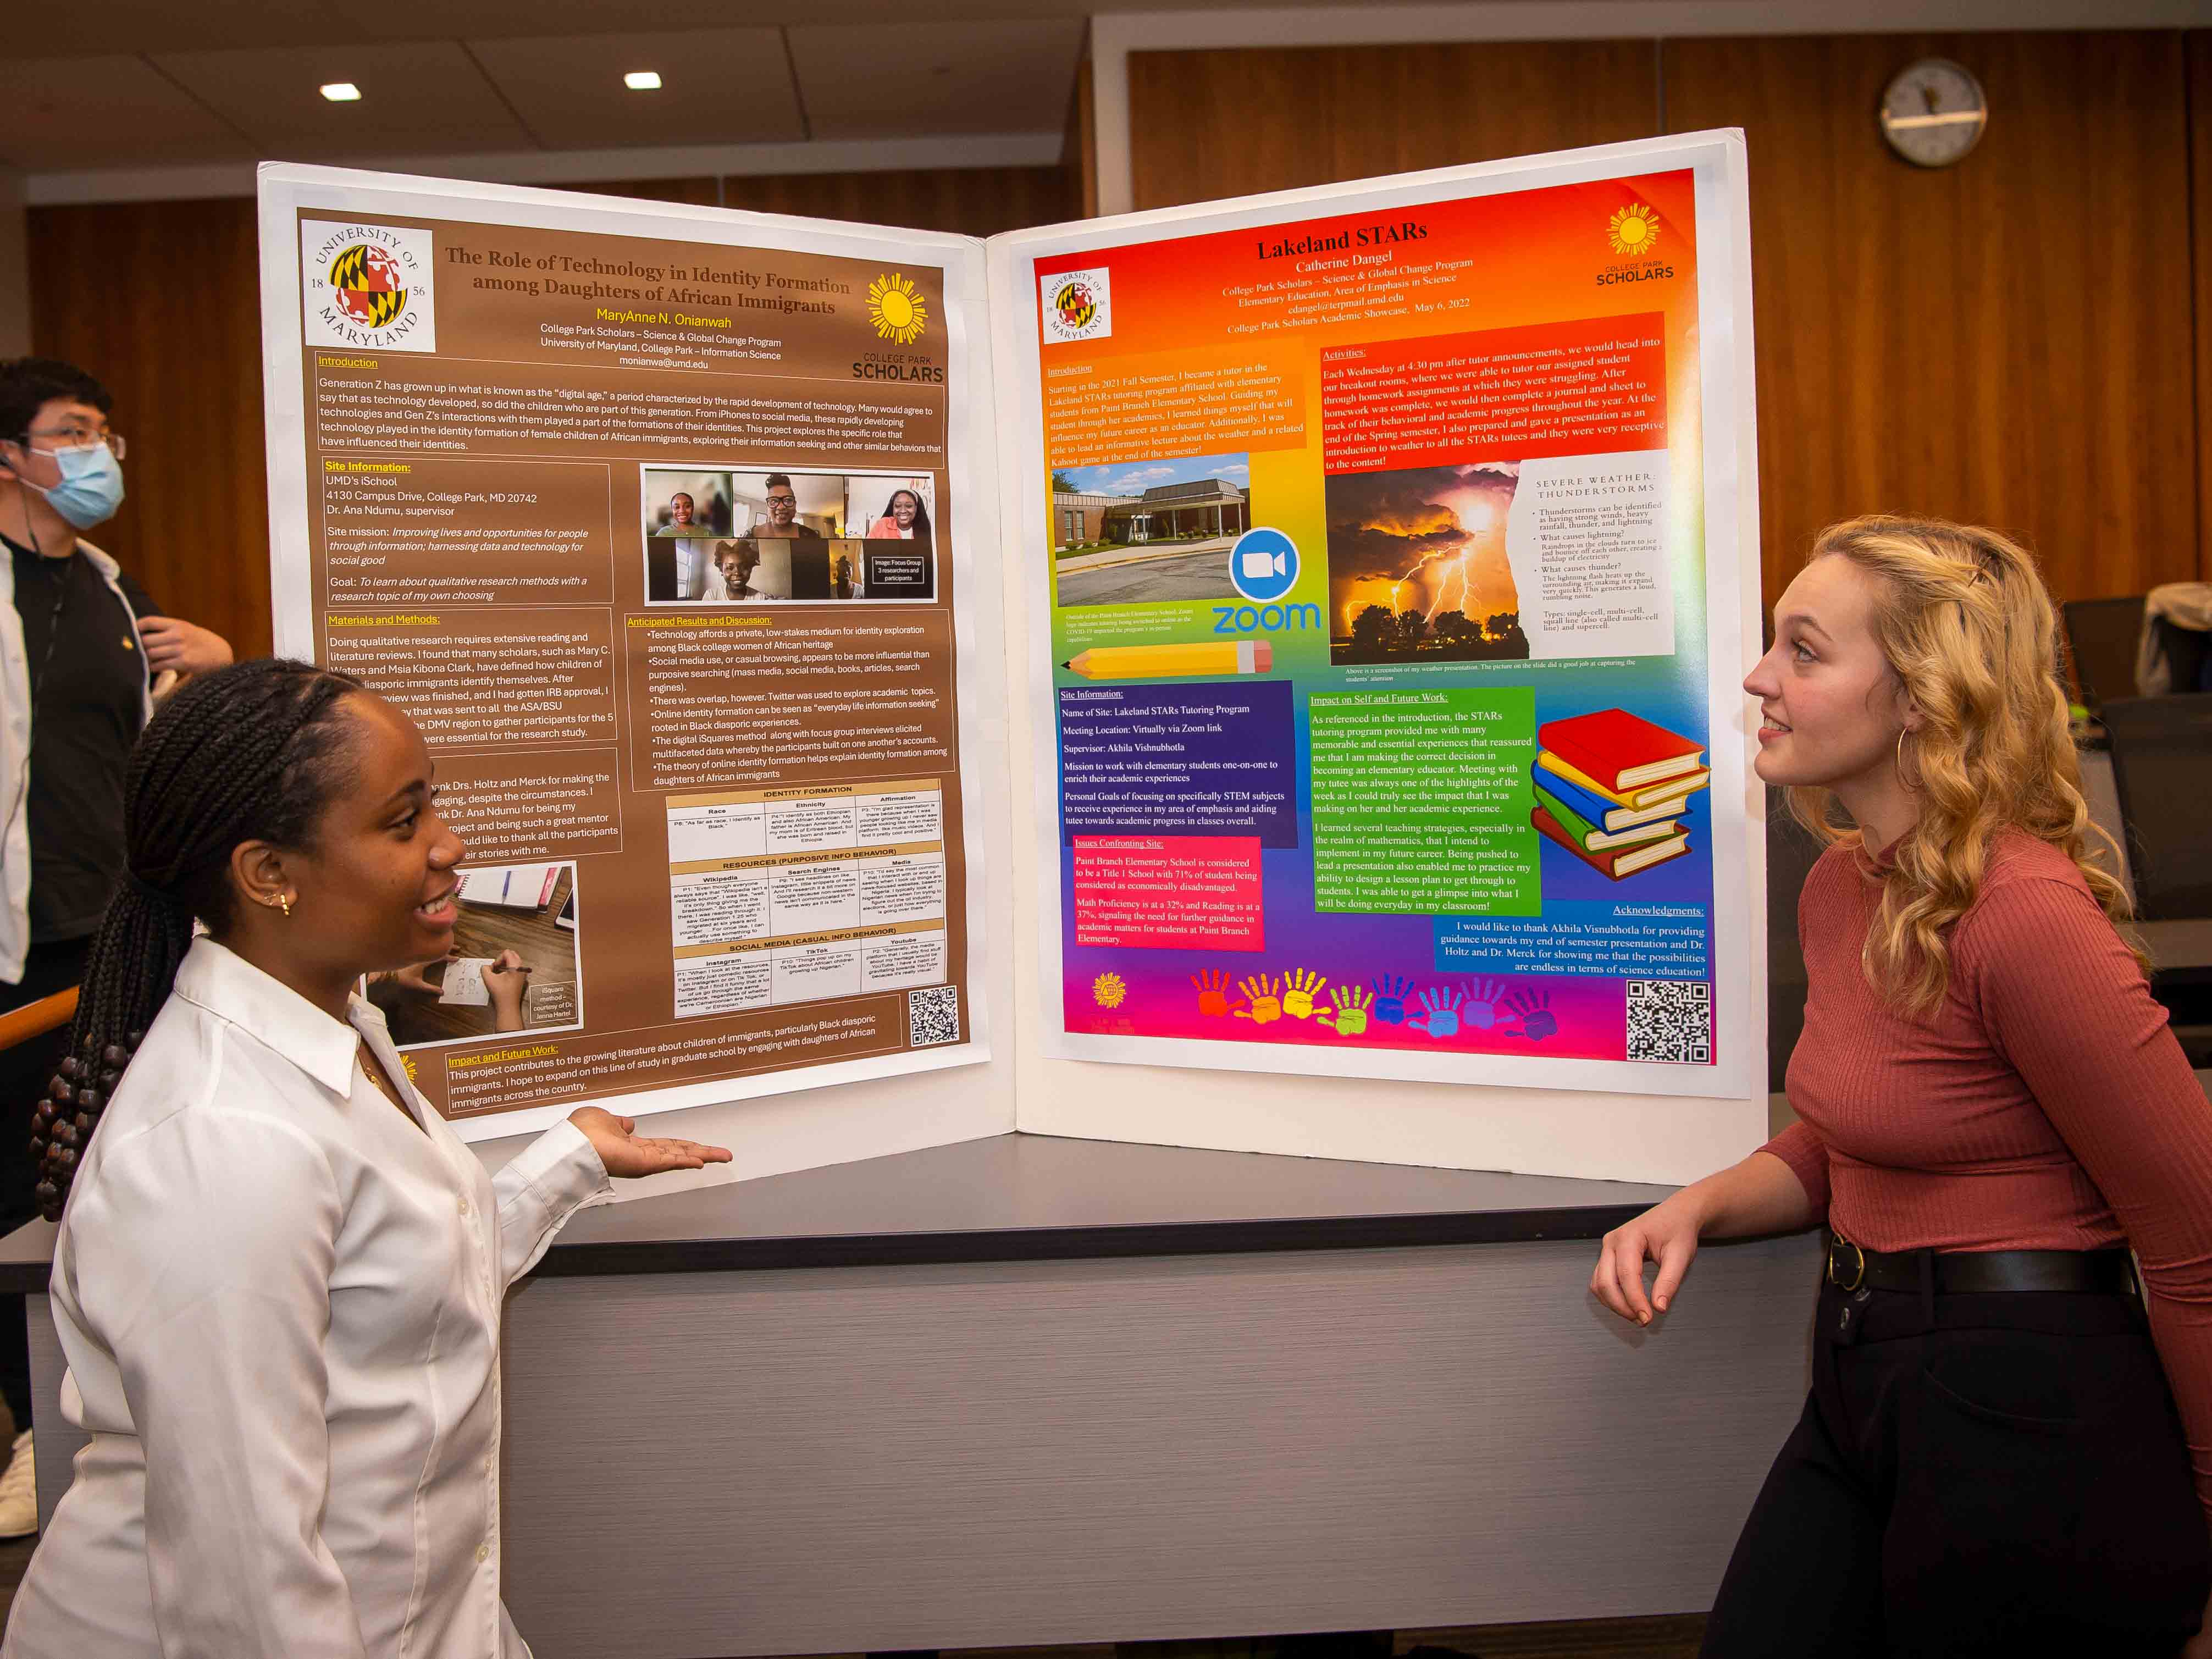 Student in white shirt presents her practicum poster to another student at Academic Showcase